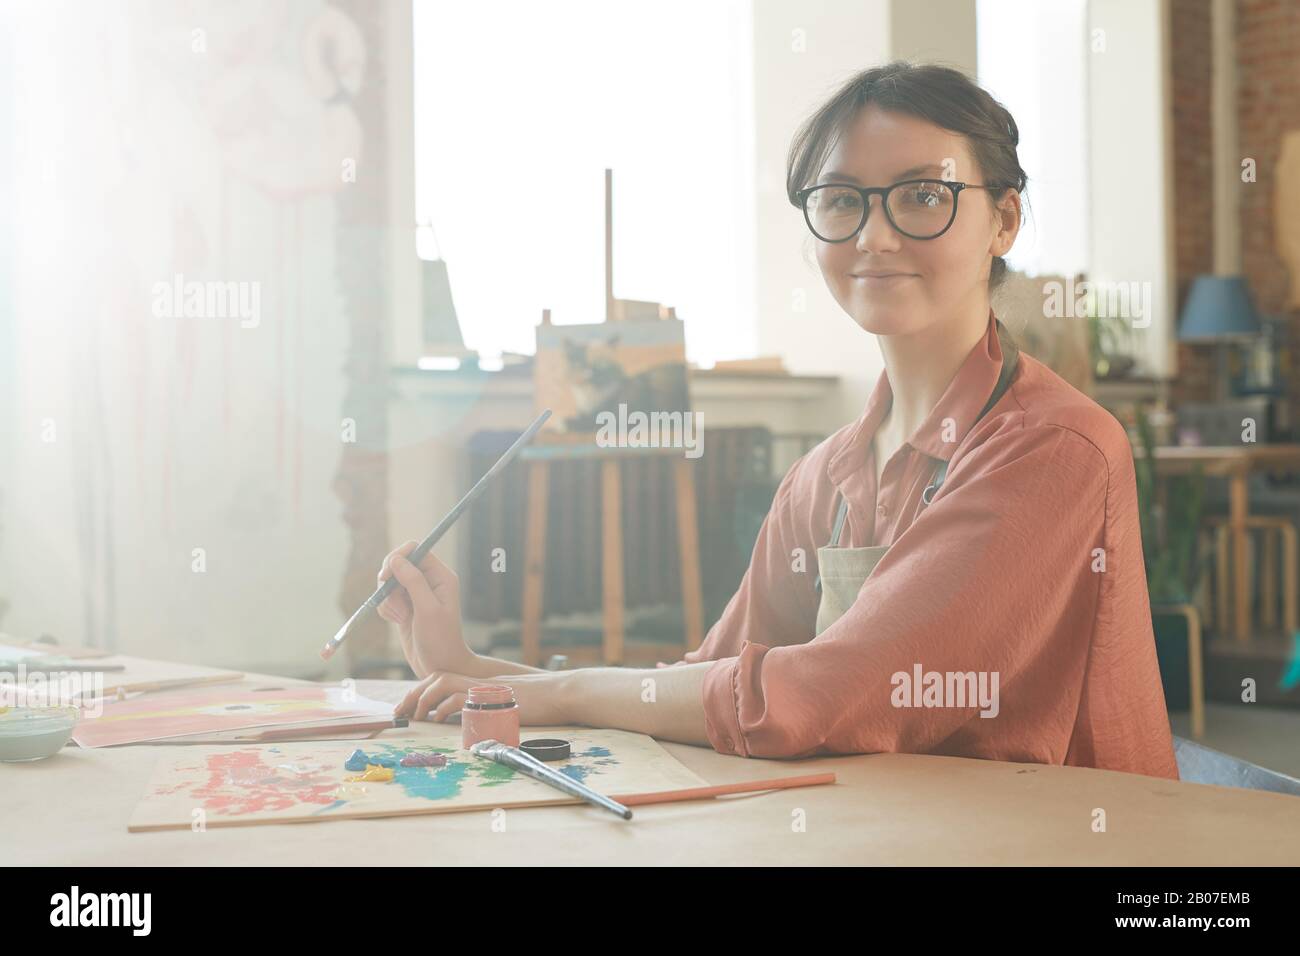 Portrait of young woman in eyeglasses smiling at camera while sitting at the table and using brush and paints at art studio Stock Photo